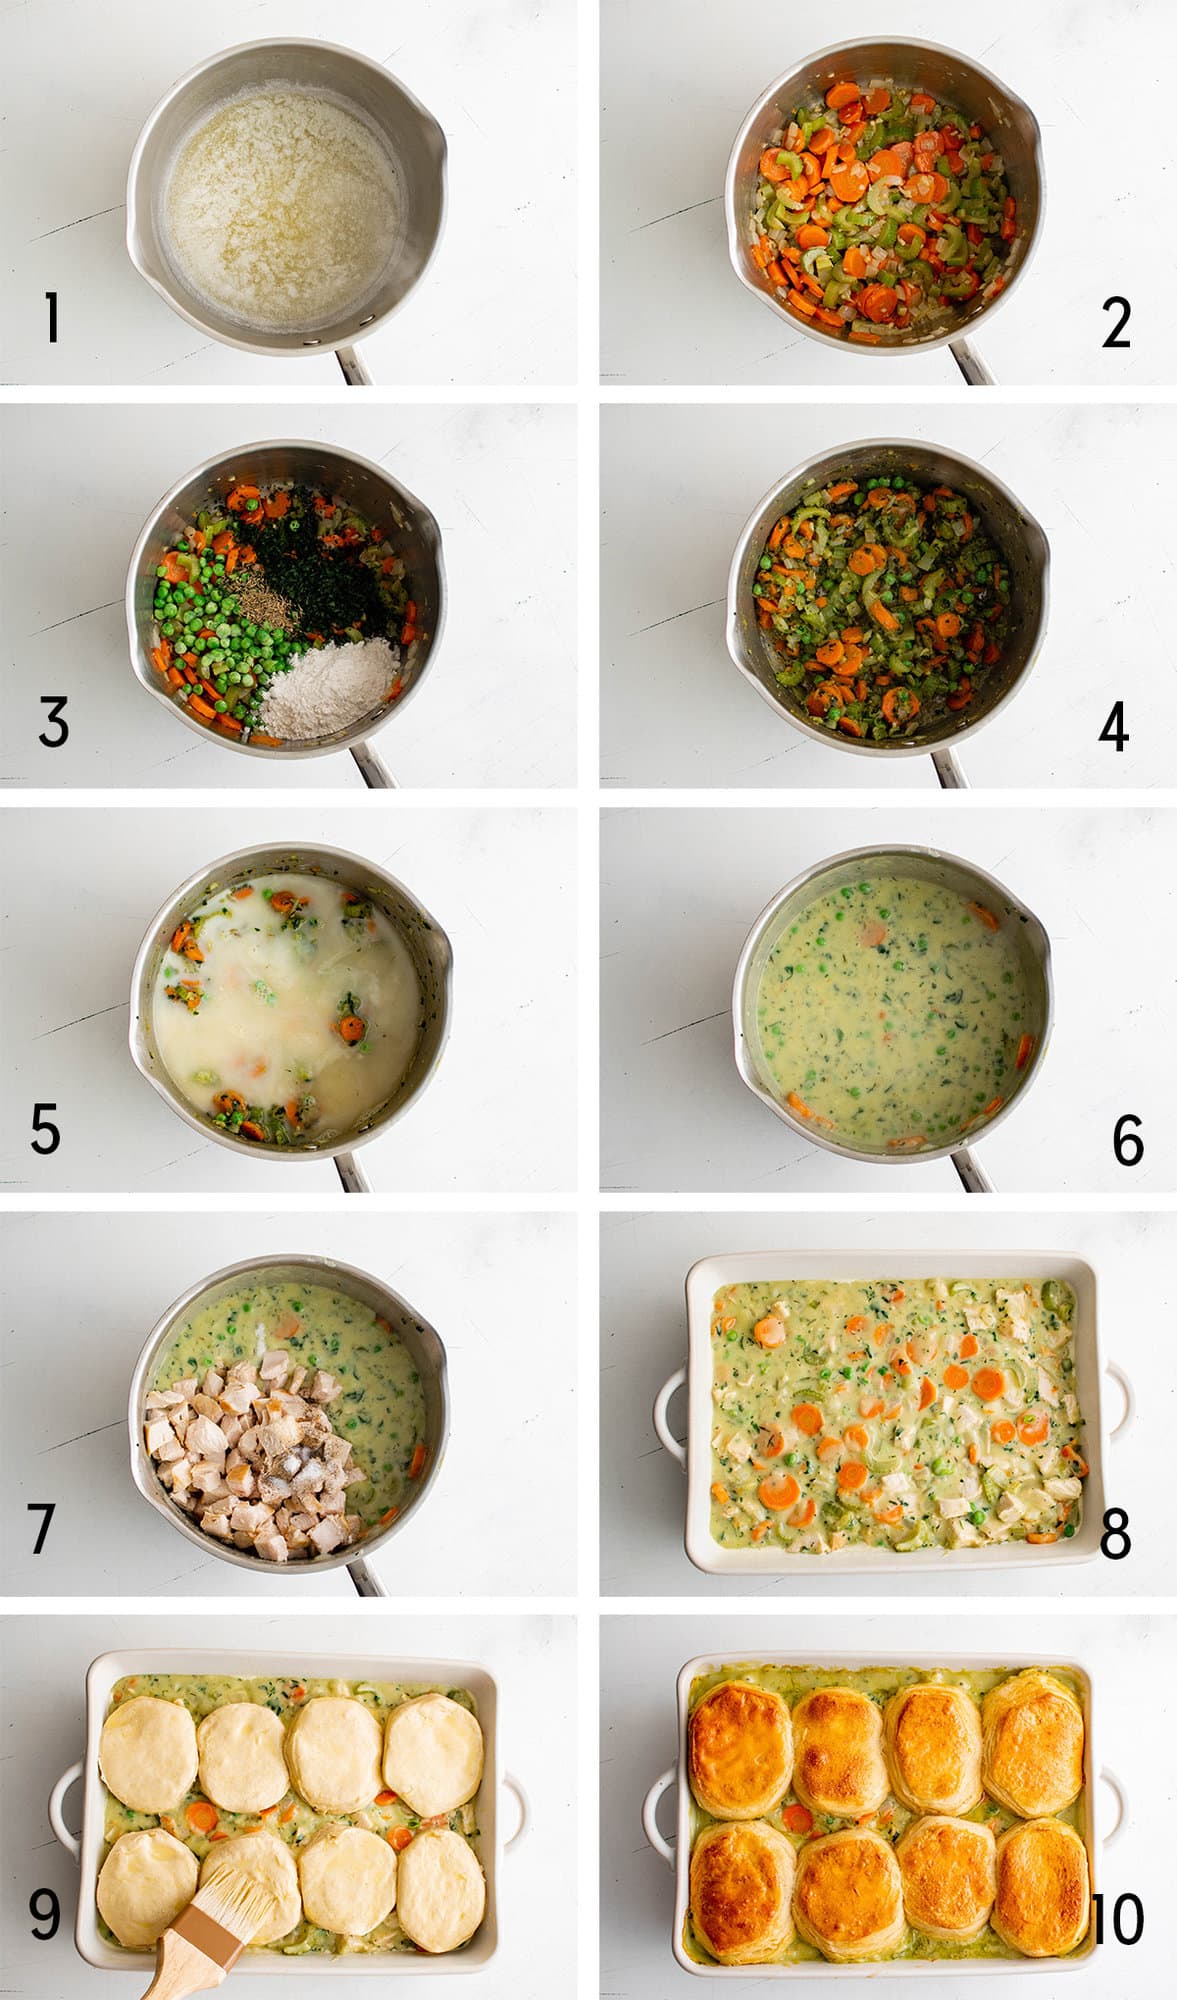 Collage of images showing how to make chicken pot pie with biscuits.